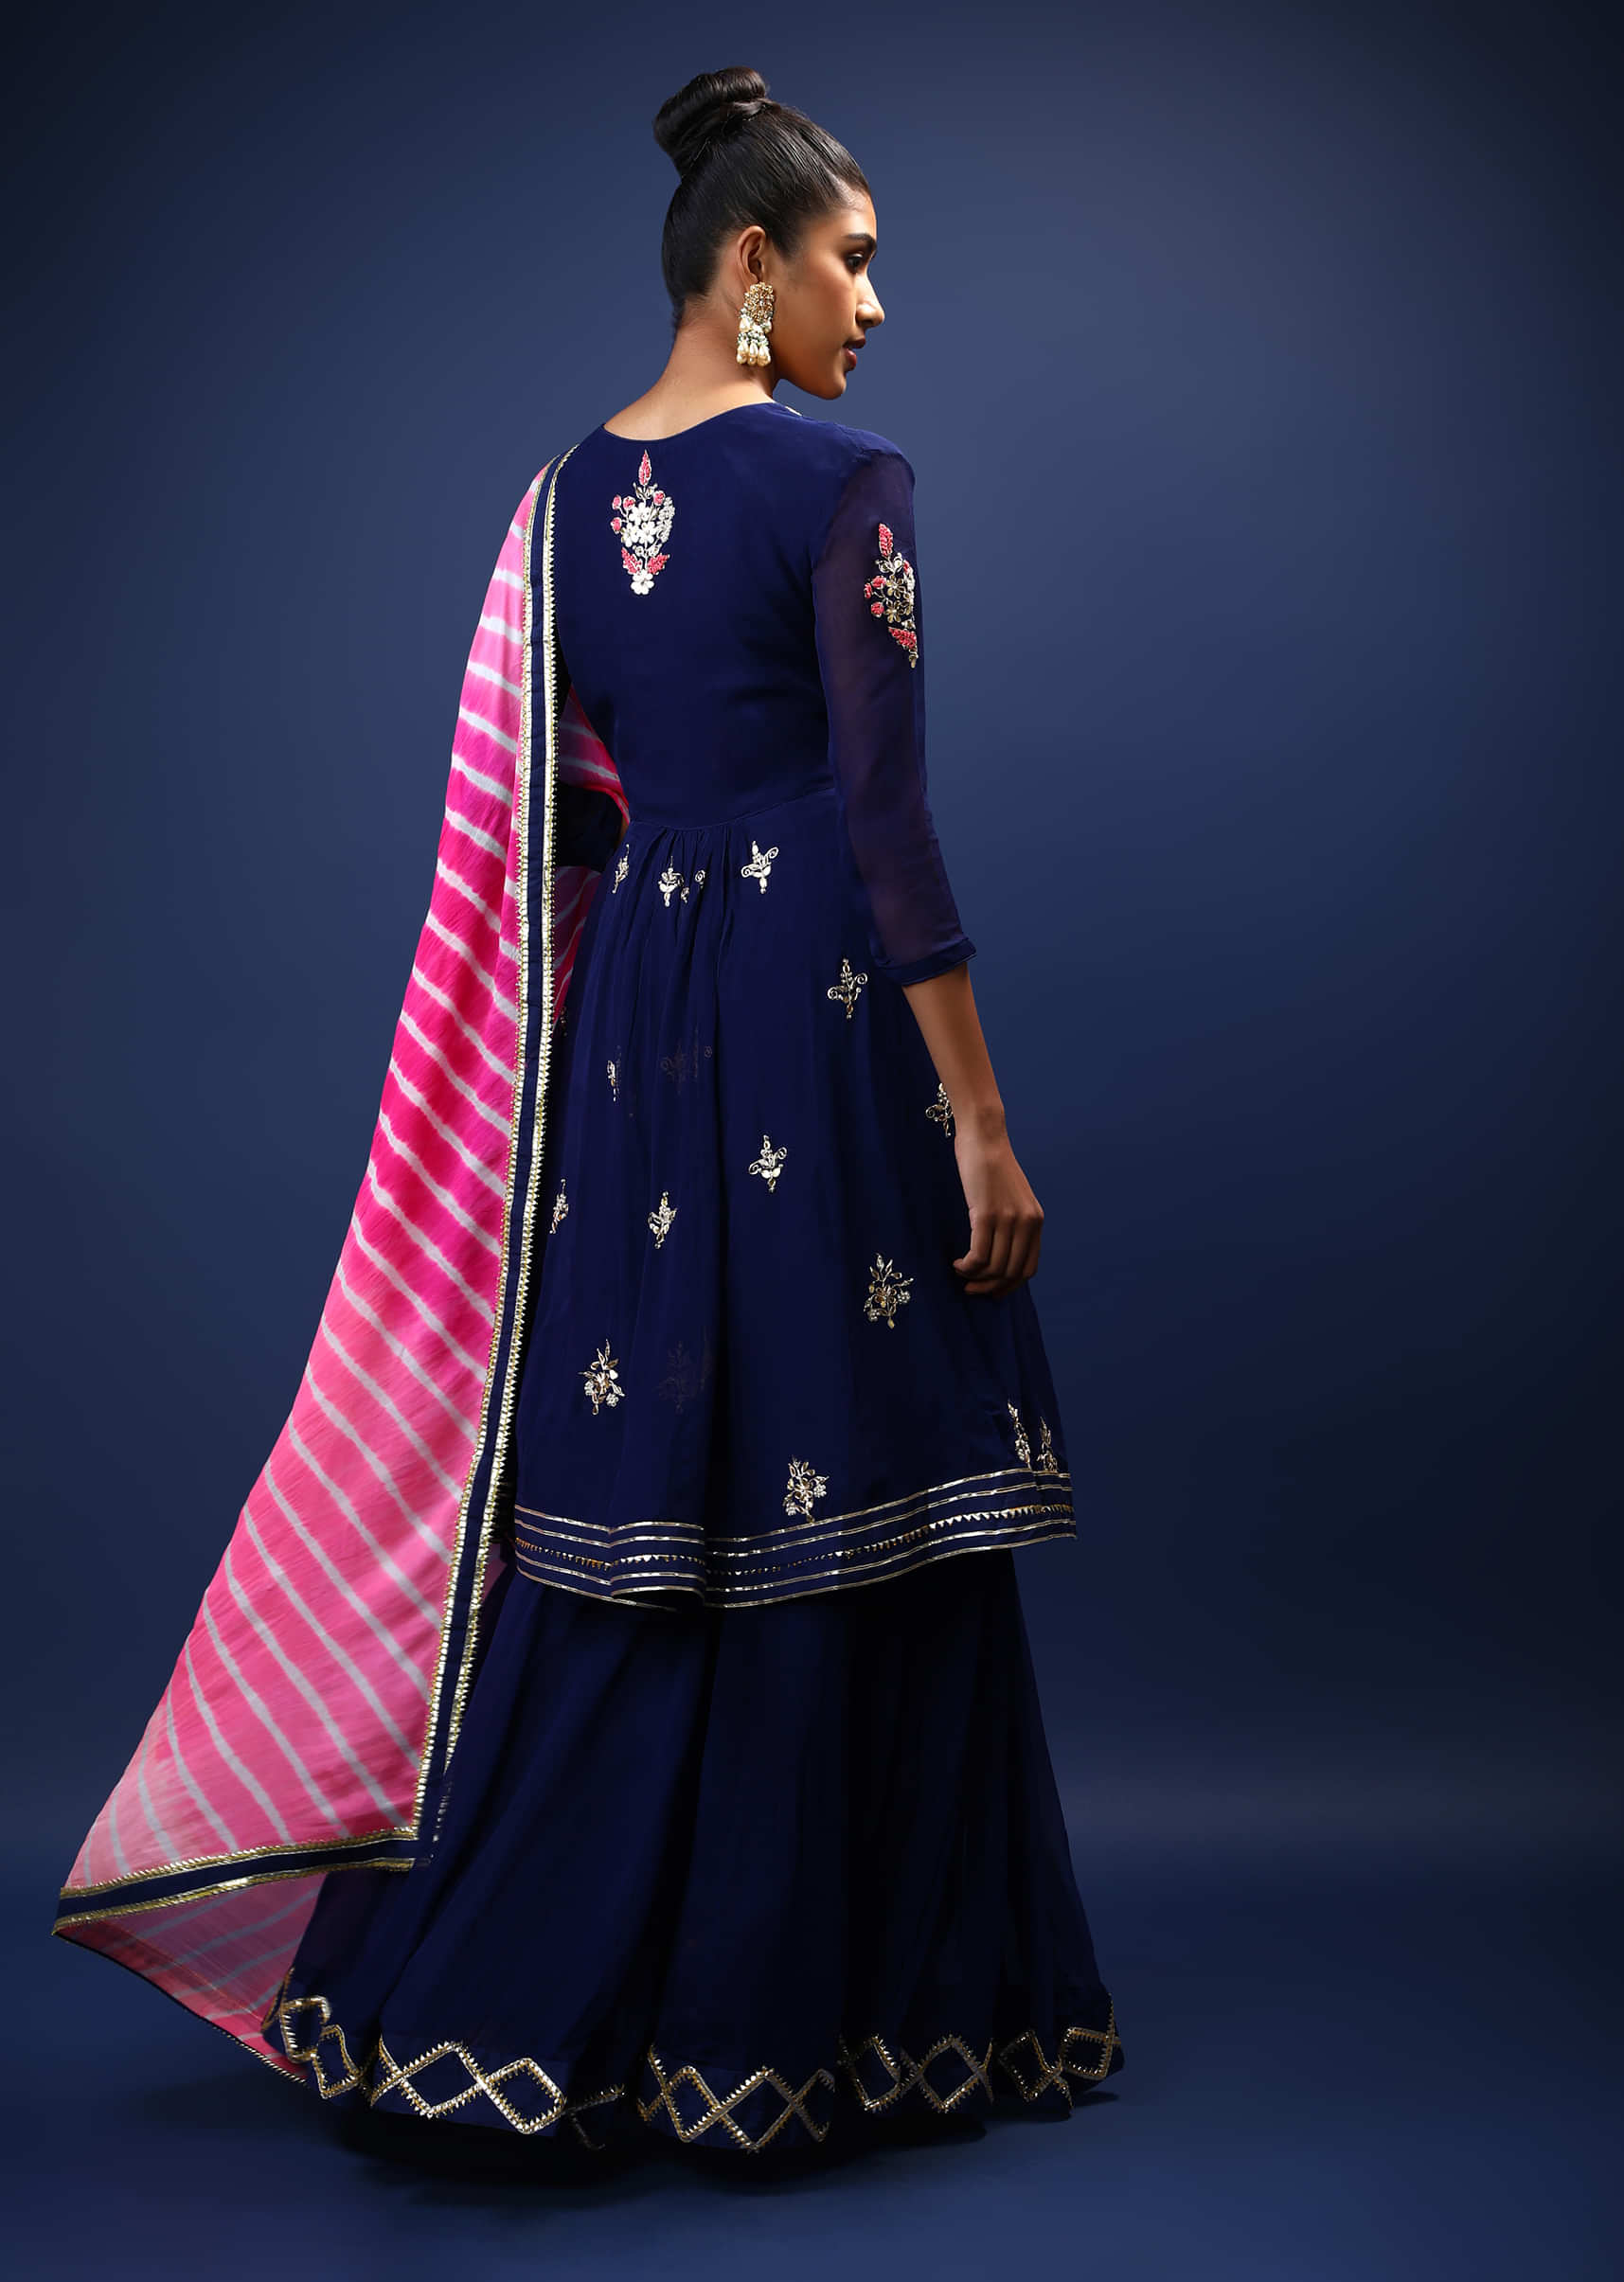 Navy Blue Skirt Suit With Pink Lehariya Printed Dupatta And A Flared Kurti With Gotta Patti And Zardosi Embroidered Floral Motifs  